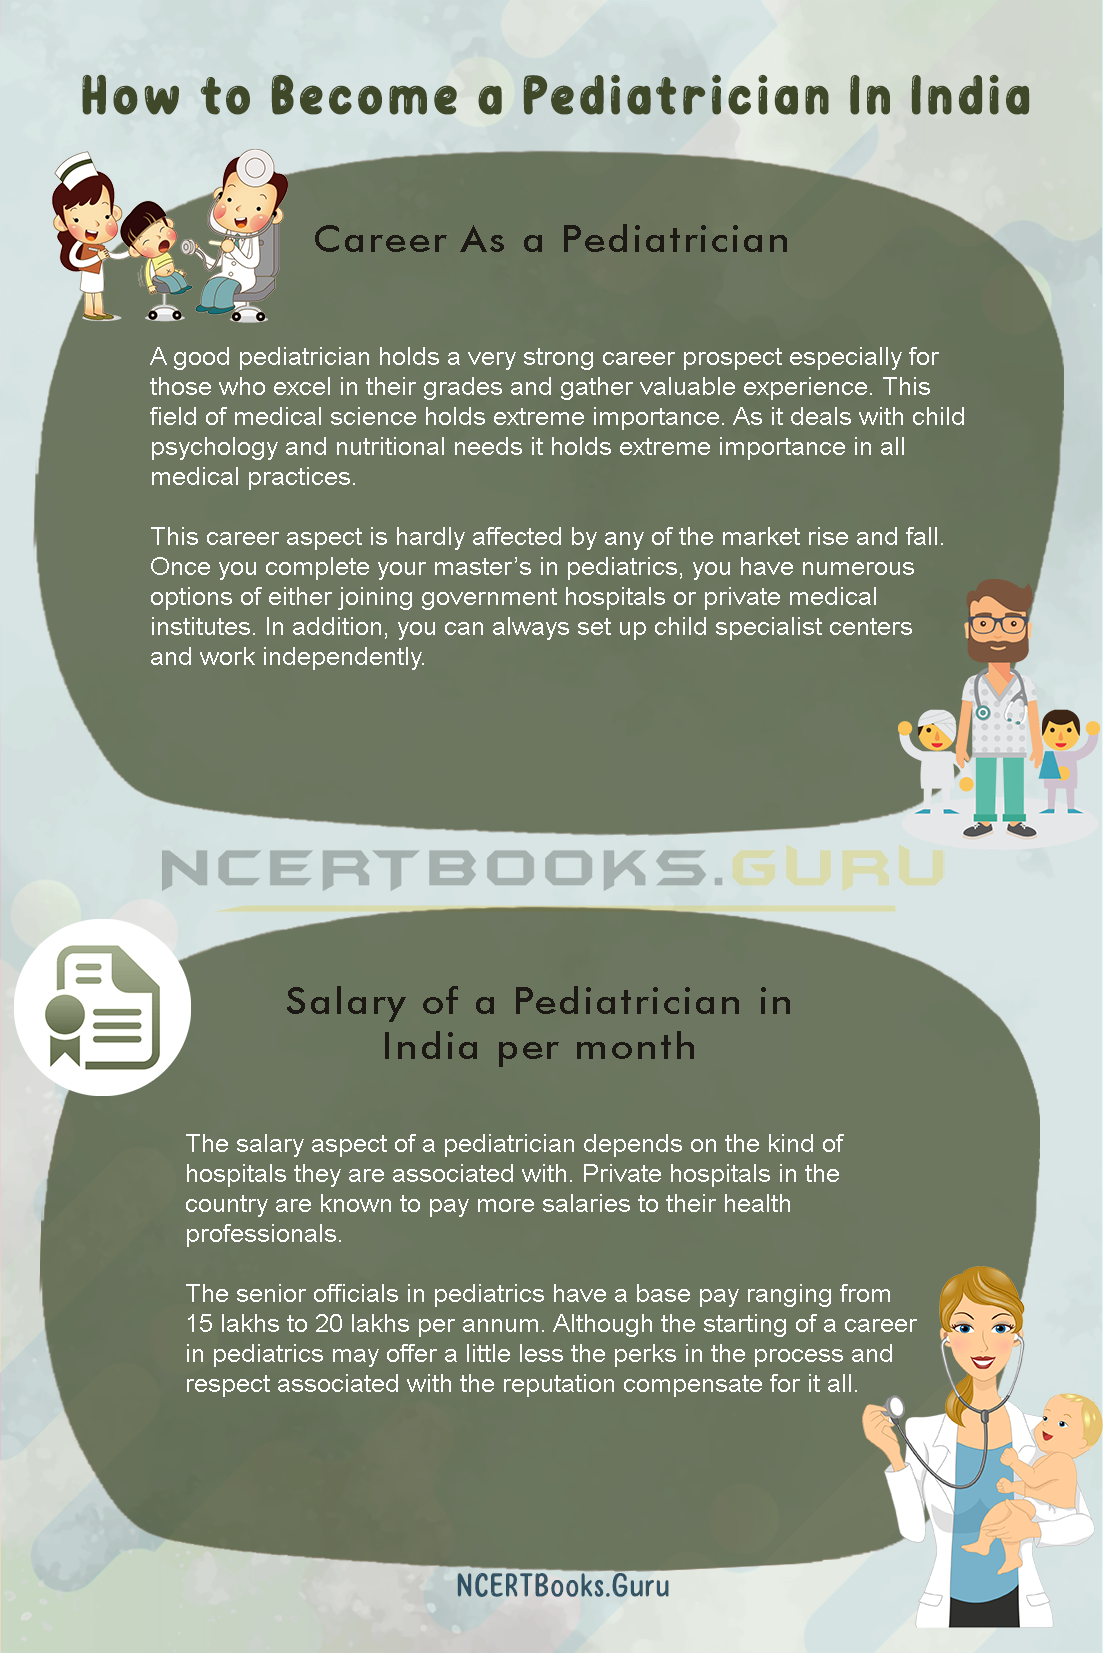 How to Become a Pediatrician In India 2